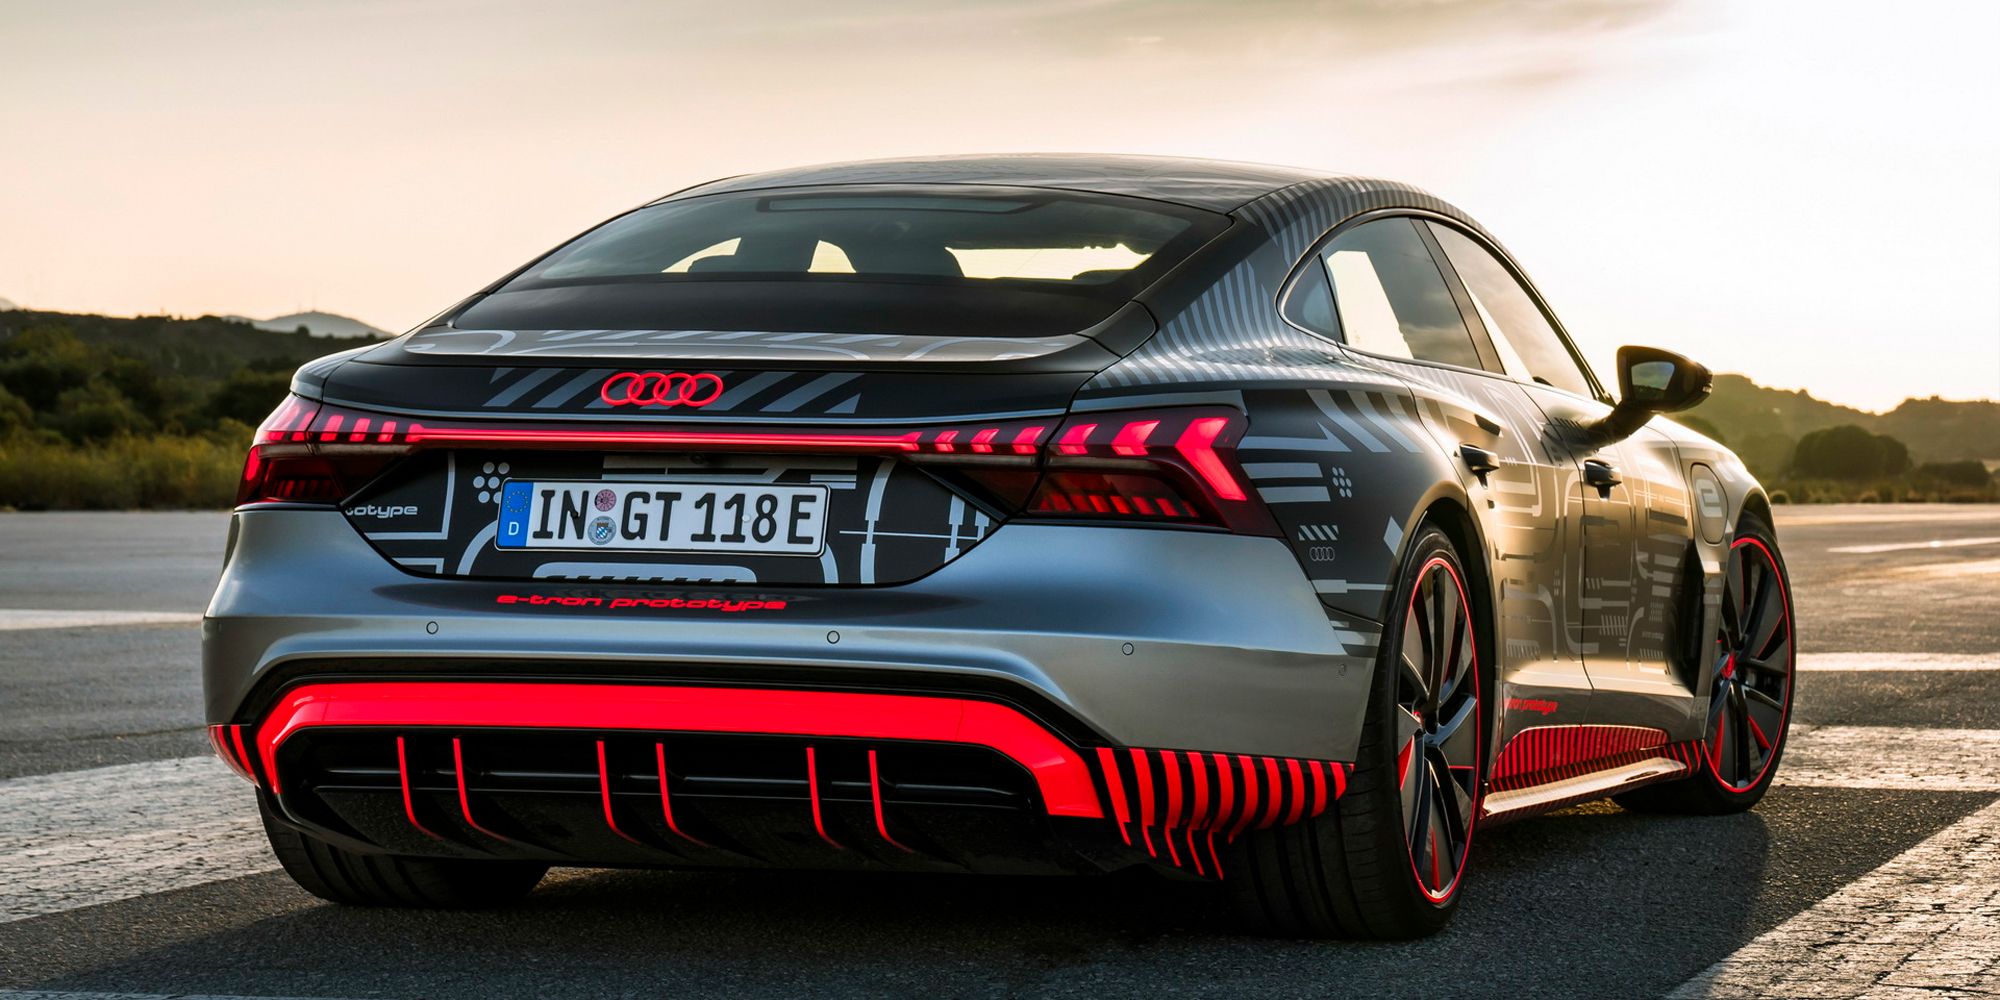 The rear of the RS e-tron GT